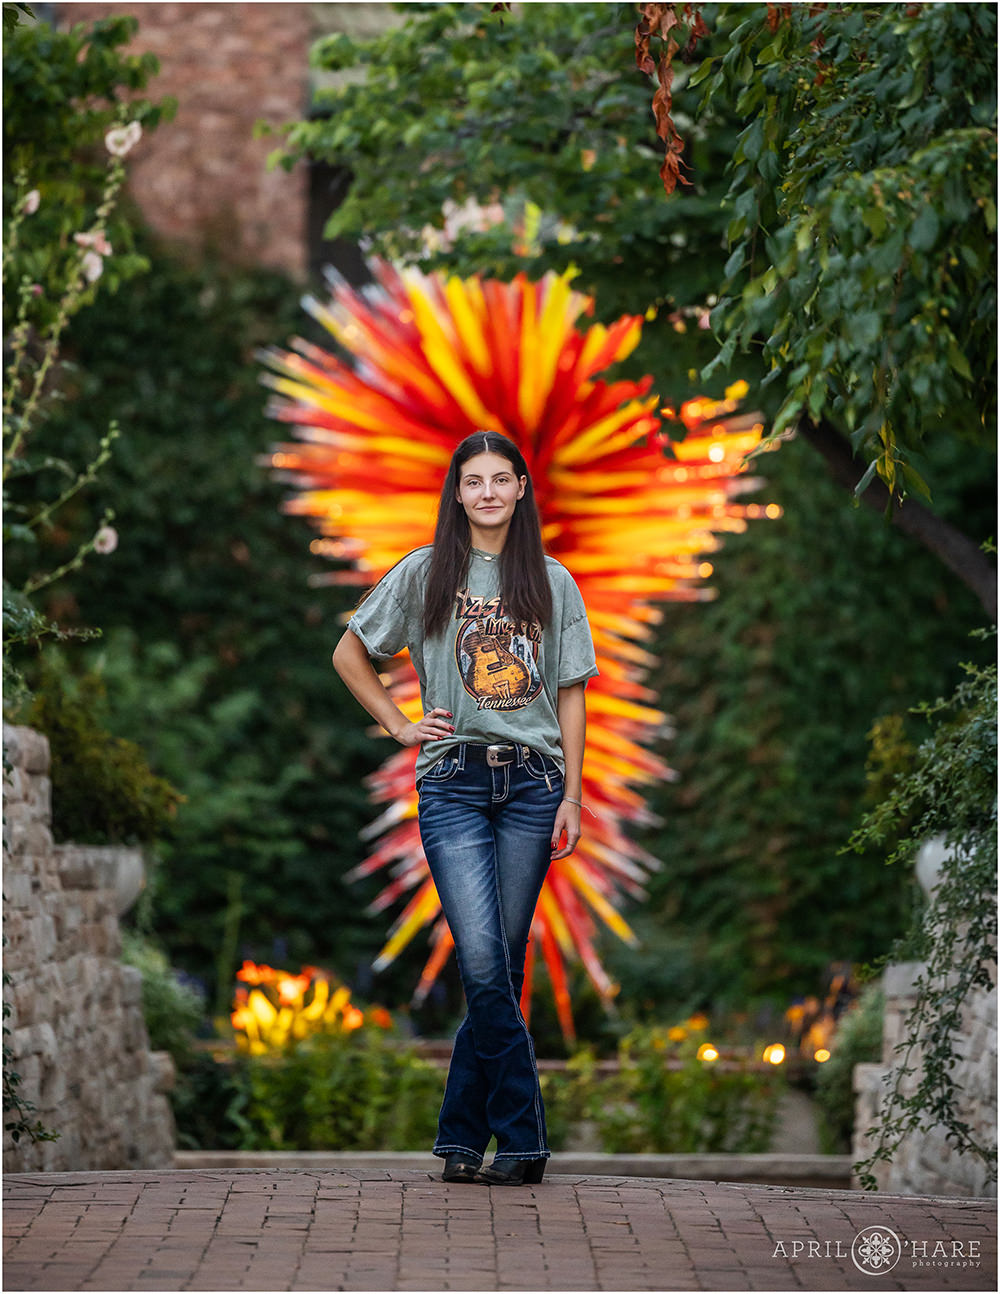 Unique senior portrait in front of the red and yellow Chihuly sculpture at Denver Botanic Gardens